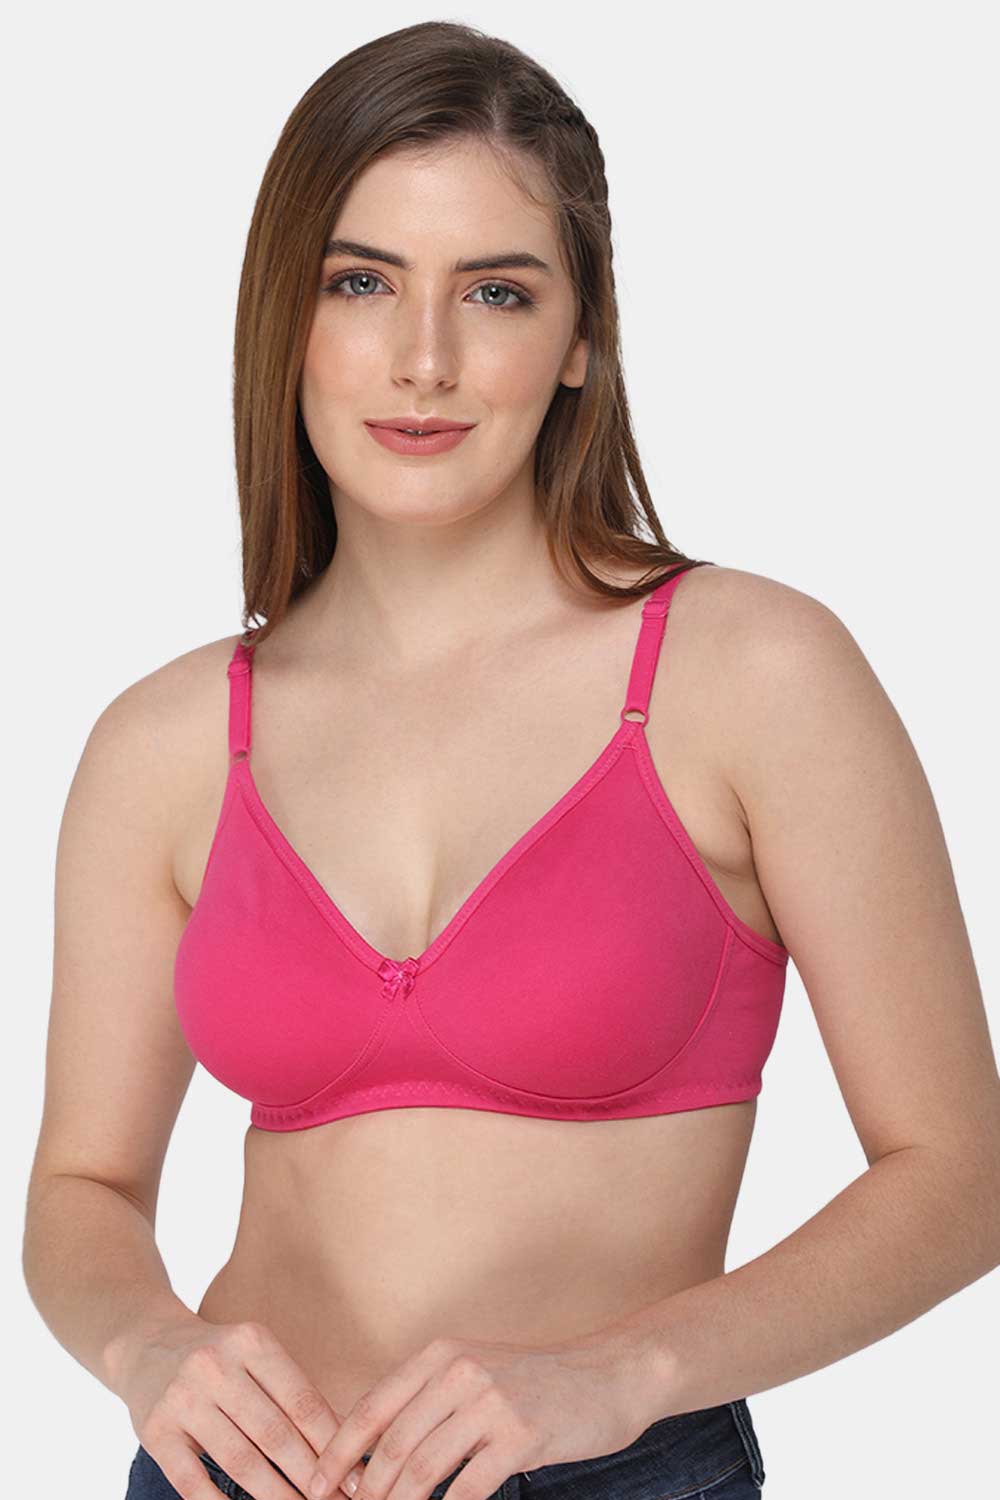 Fuscia Cotton Mix Underwired Bra size 40C by Shapely Figures Cool Pretty